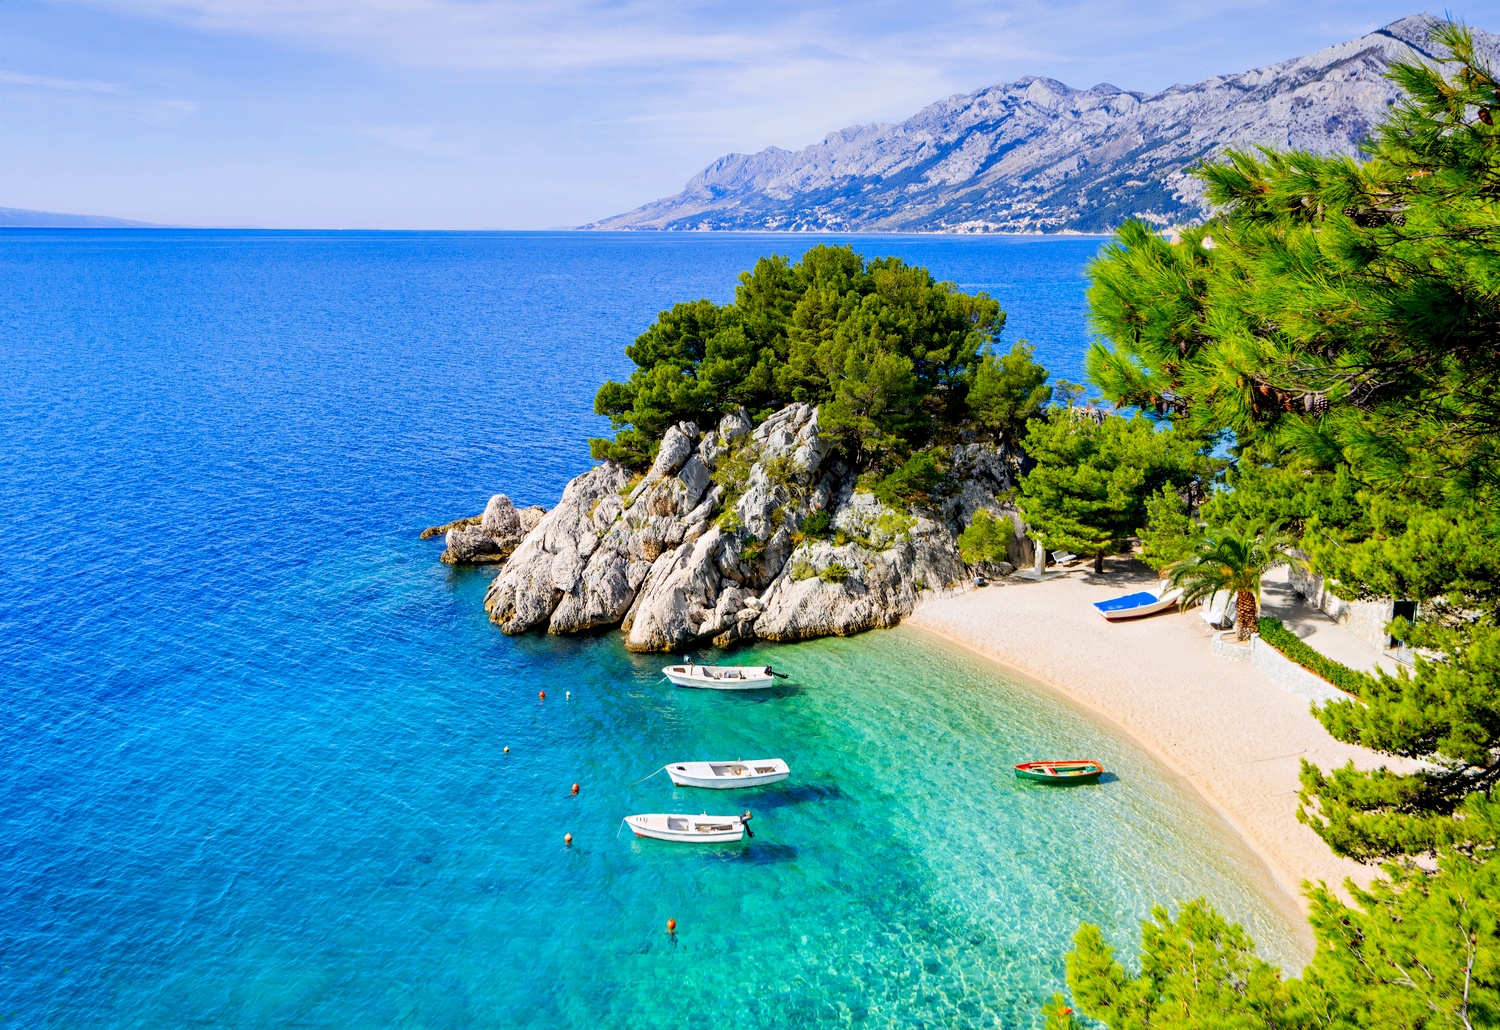 Get to know the most beautiful beaches in Croatia